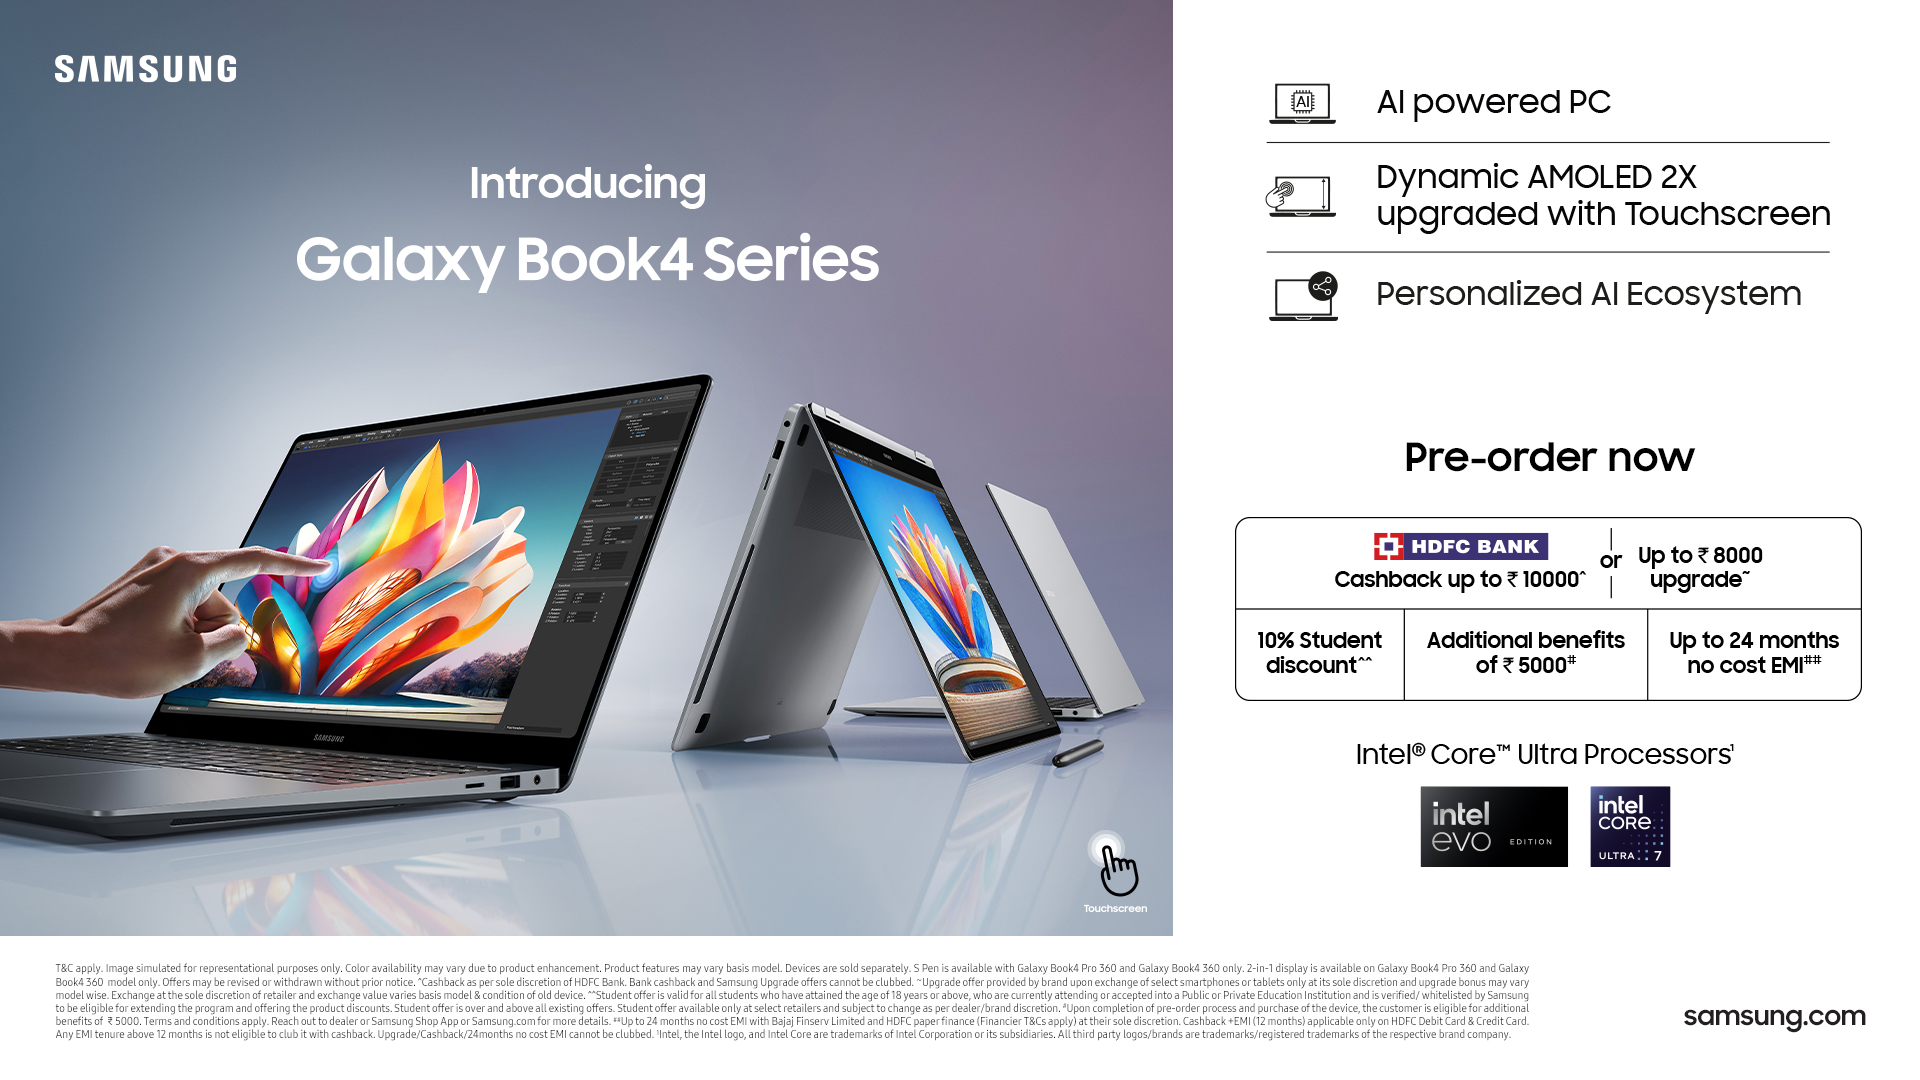 Galaxy Book4 Series: Pricing and Features